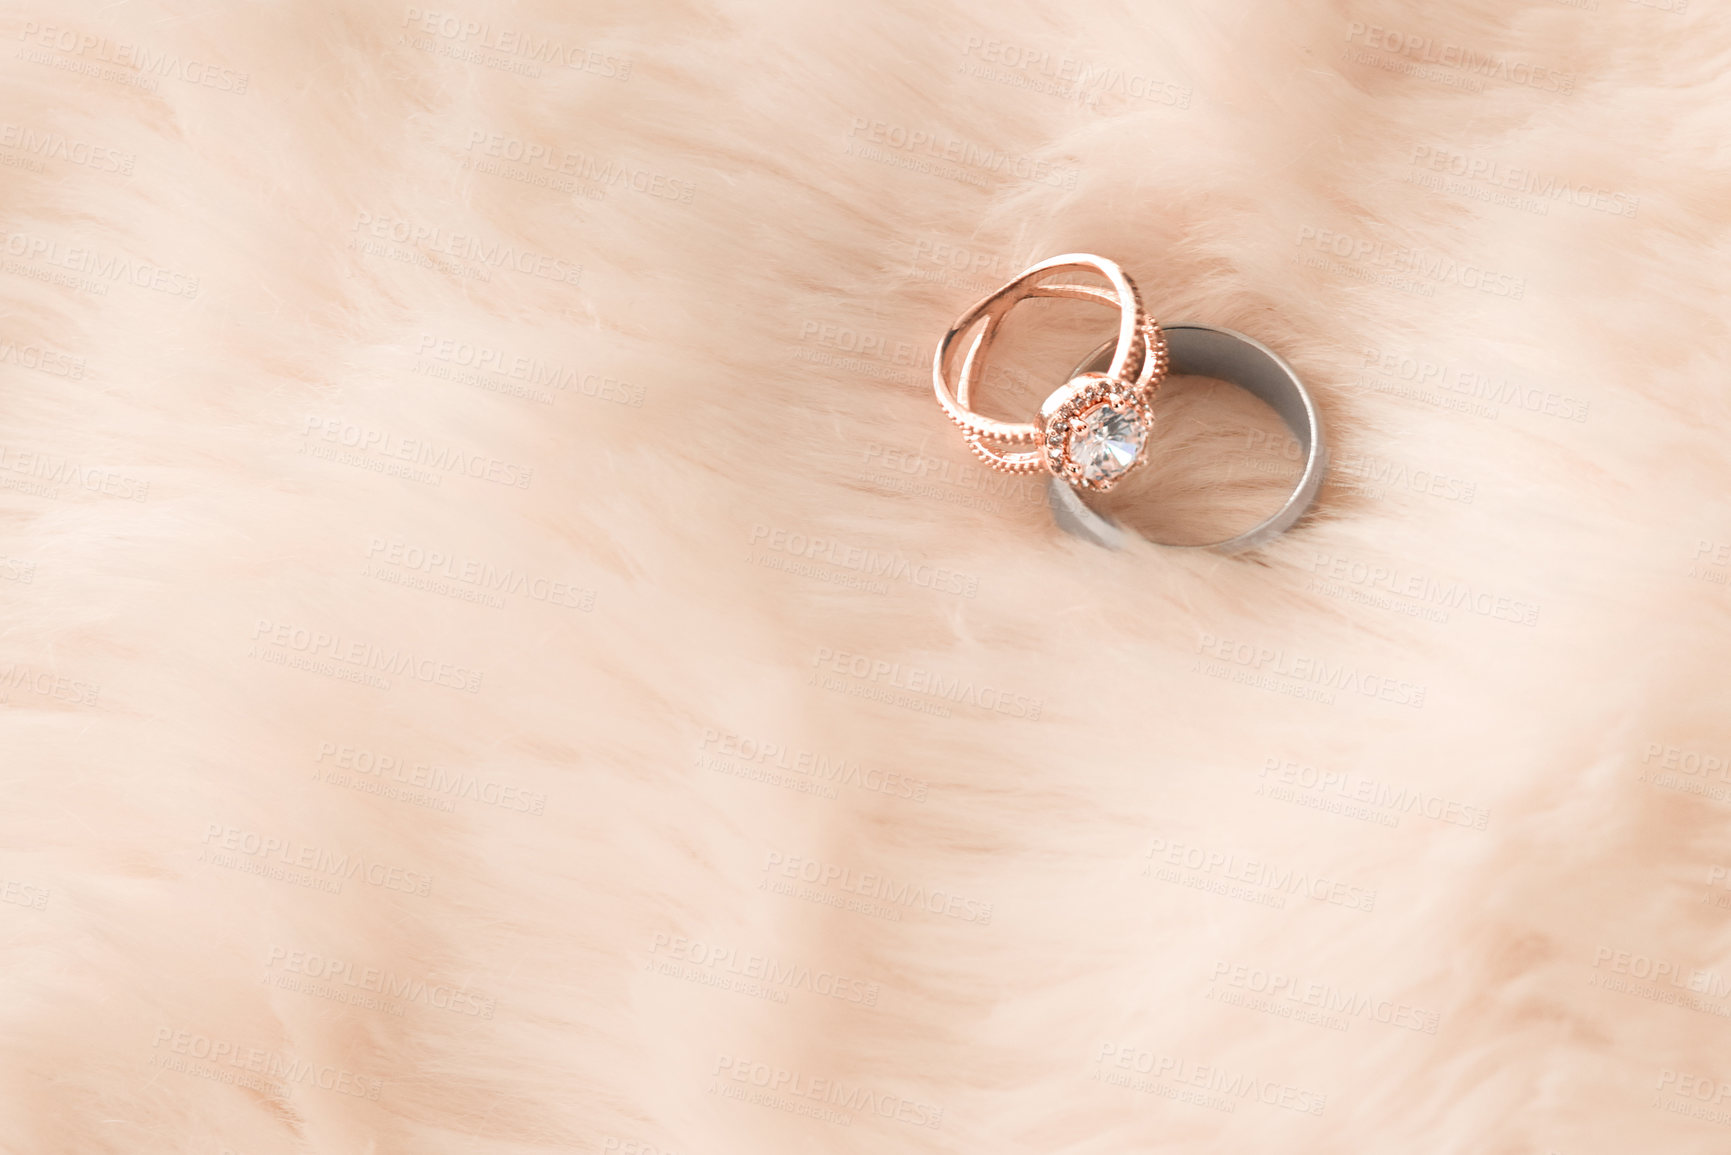 Buy stock photo Shot of two wedding rings on a furry background